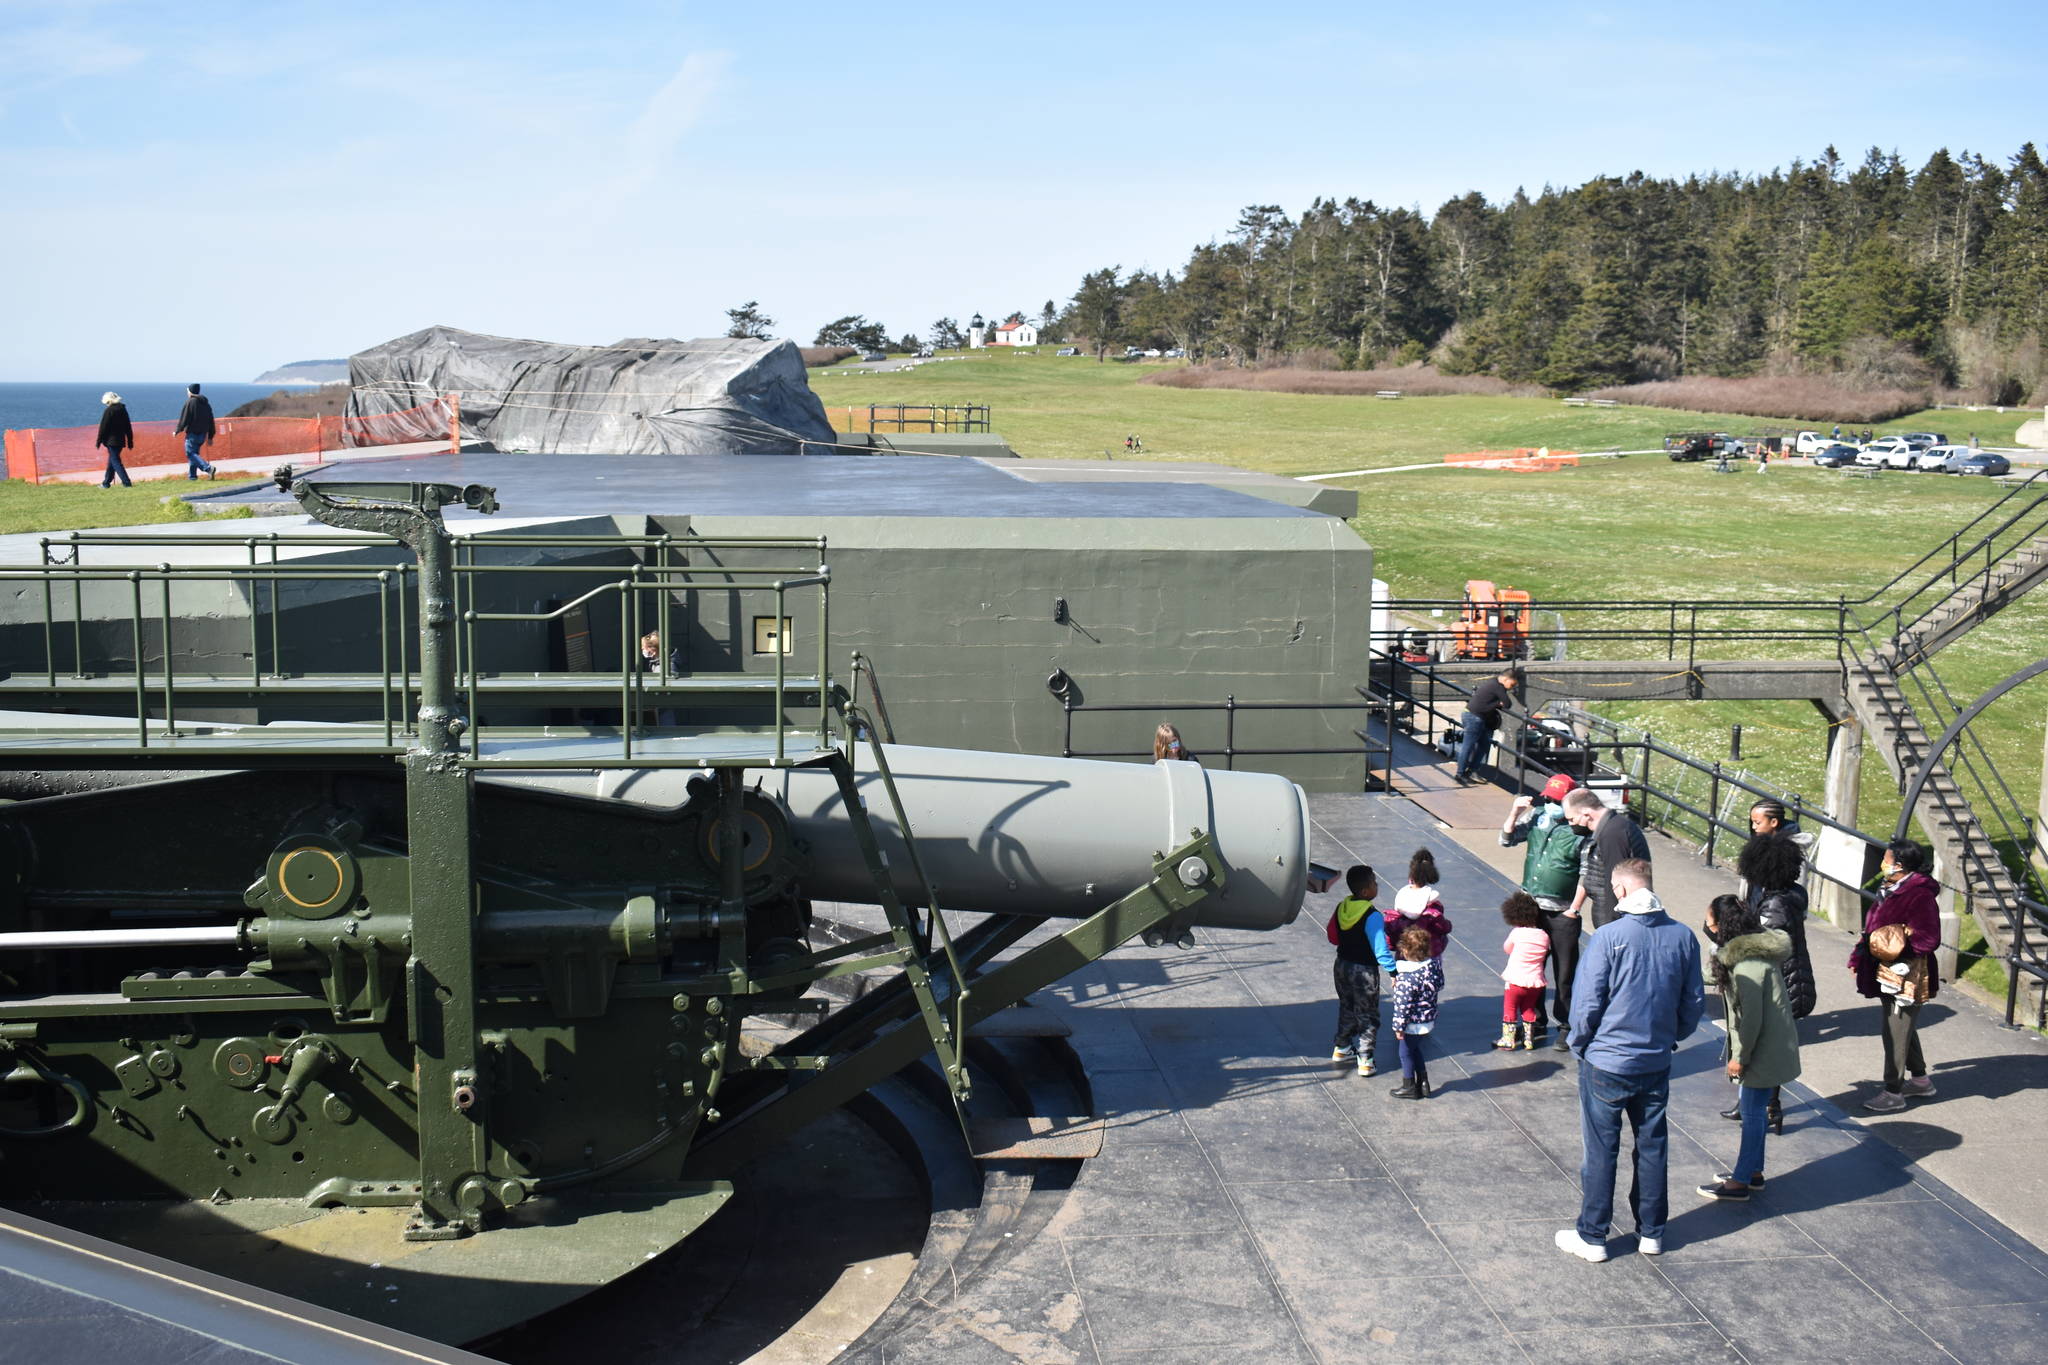 Photo by Emily Gilbert/Whidbey News-Times
David Anderson, a volunteer at Fort Casey Historical State Park, explains the significance of the “big guns” to park visitors.